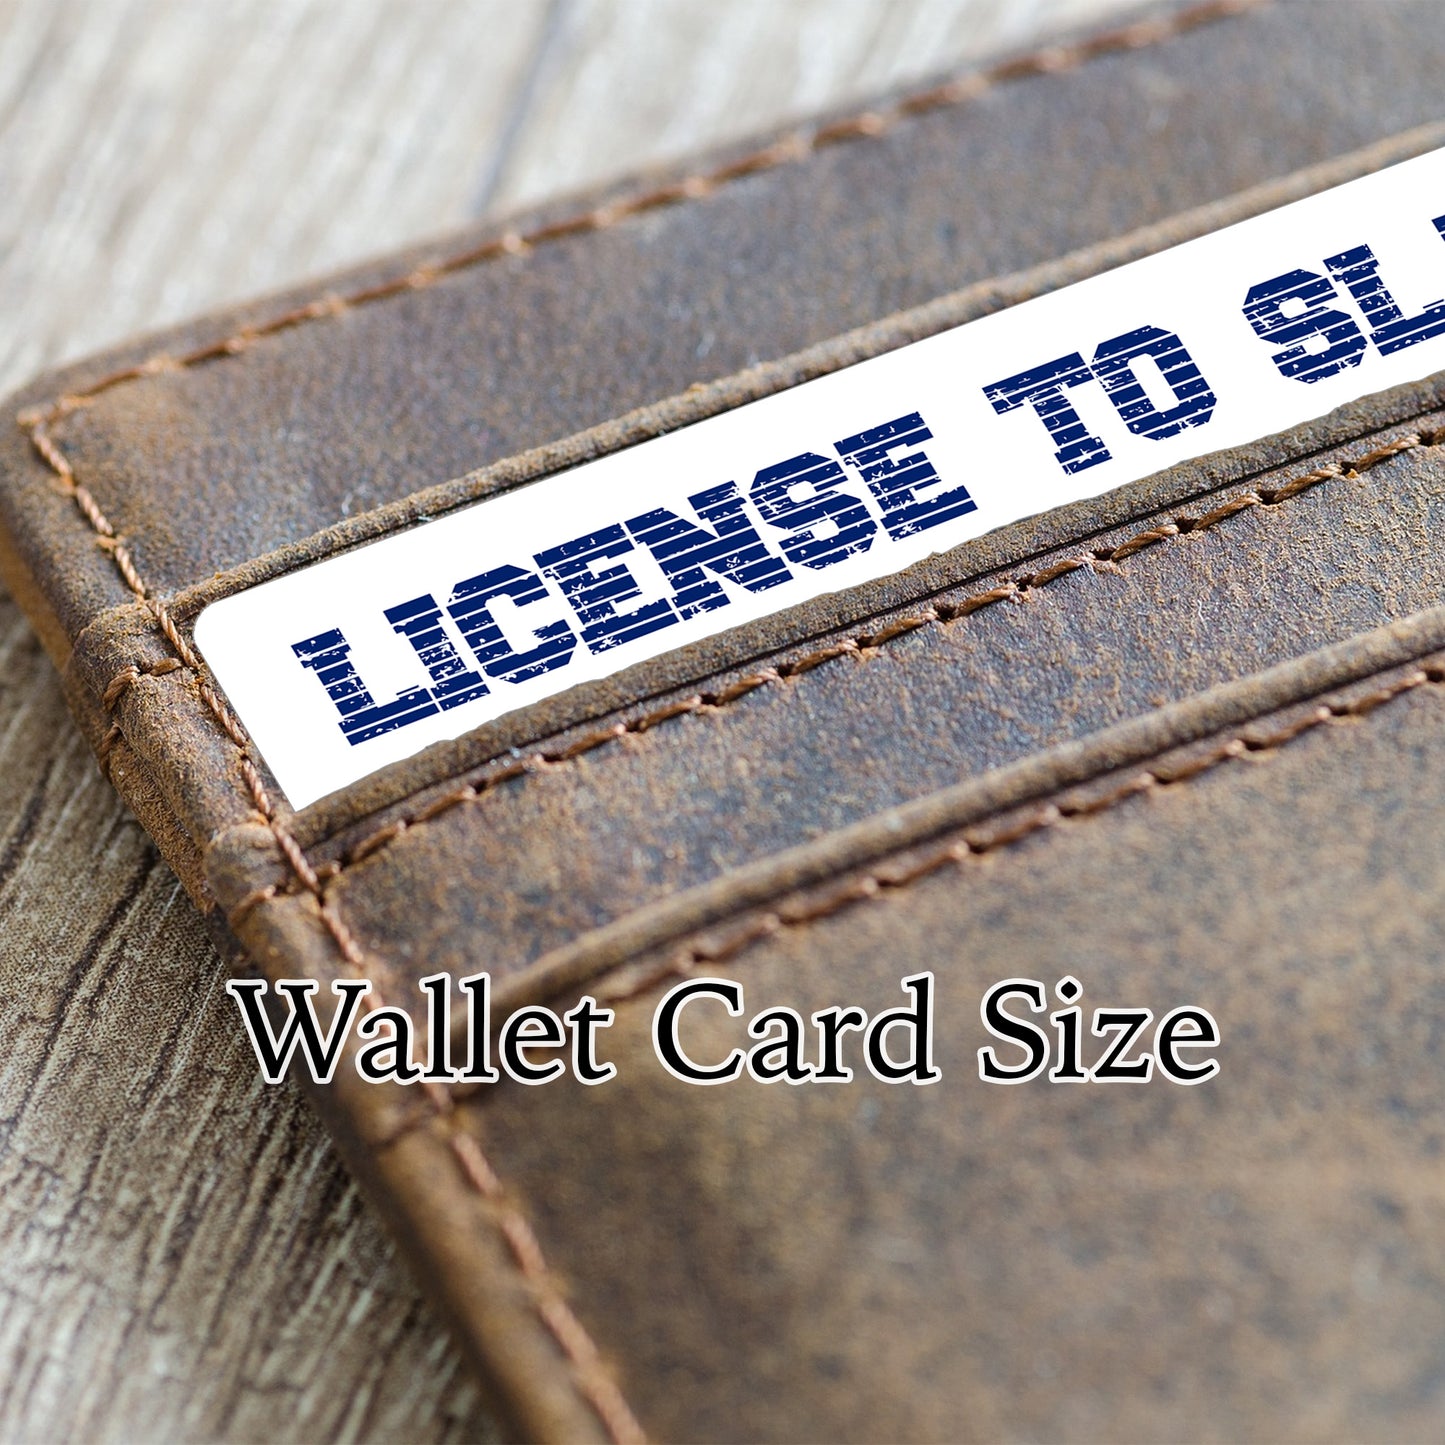 Androsexual pride personalised license to slay card